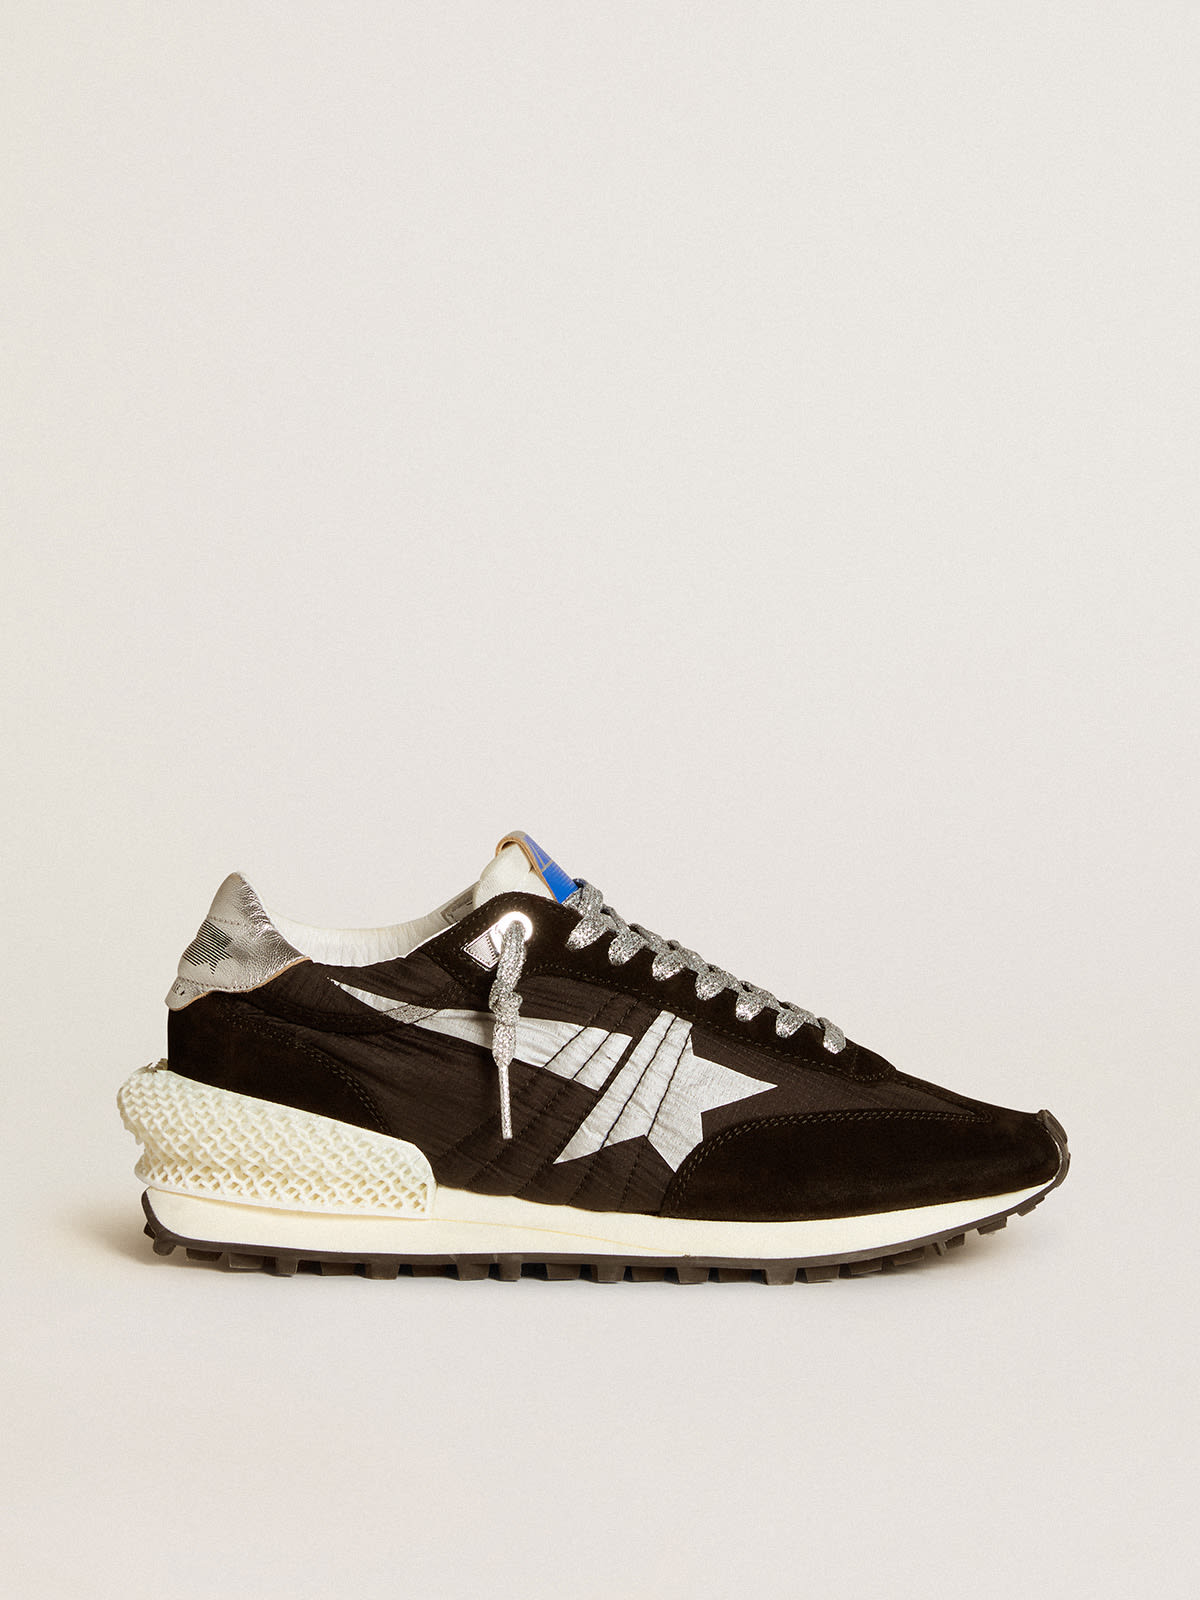 Golden Goose - Women’s Marathon with black ripstop nylon upper and silver star in 